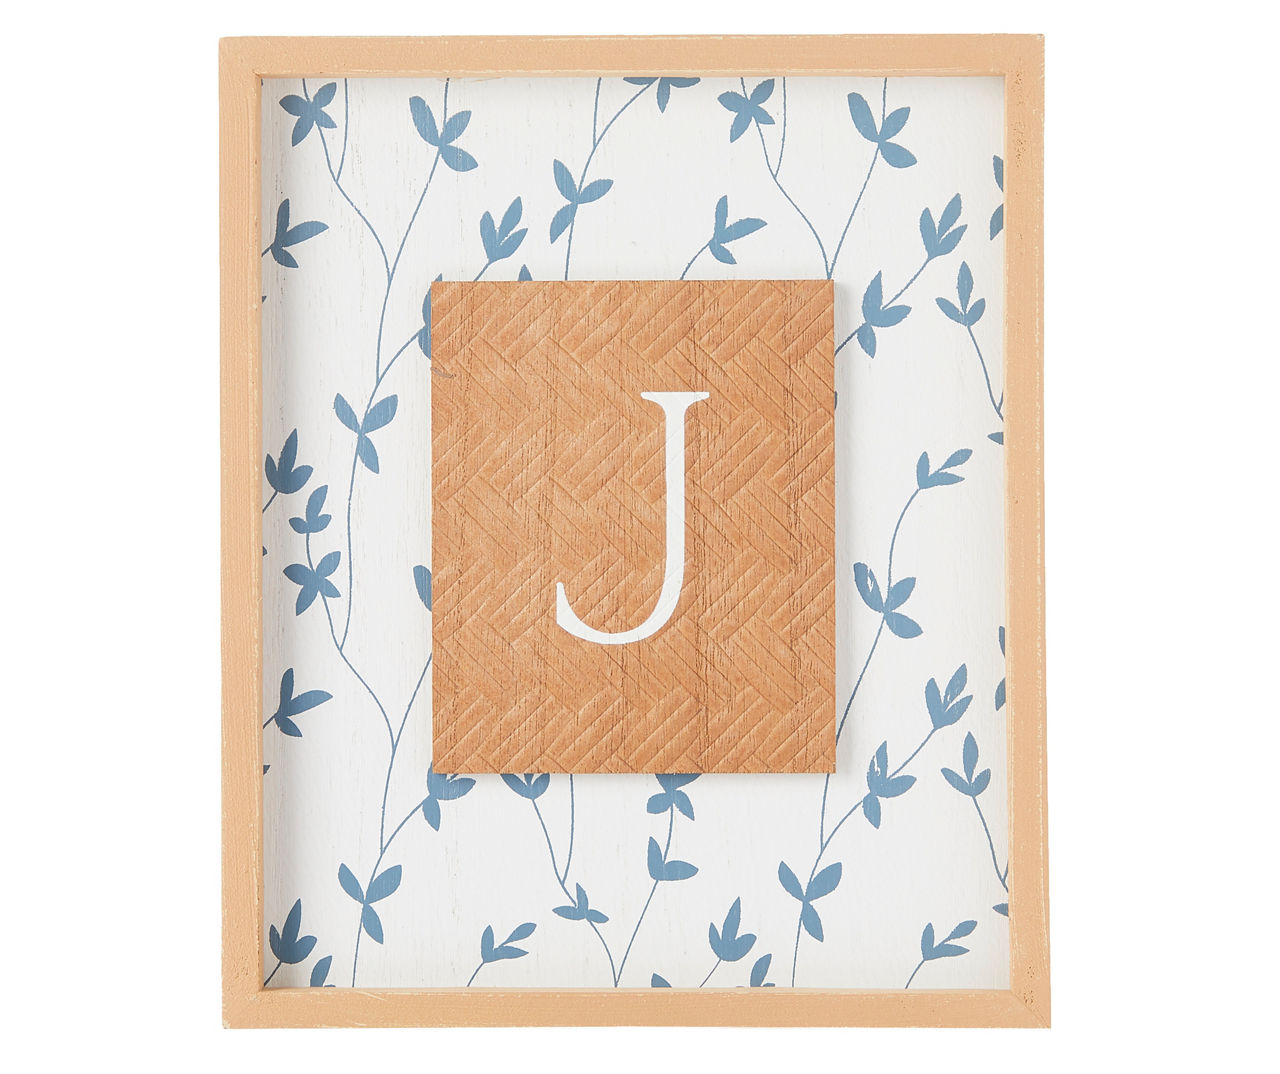 "J" White, Brown & Blue Floral Tabletop Plaque With Easel